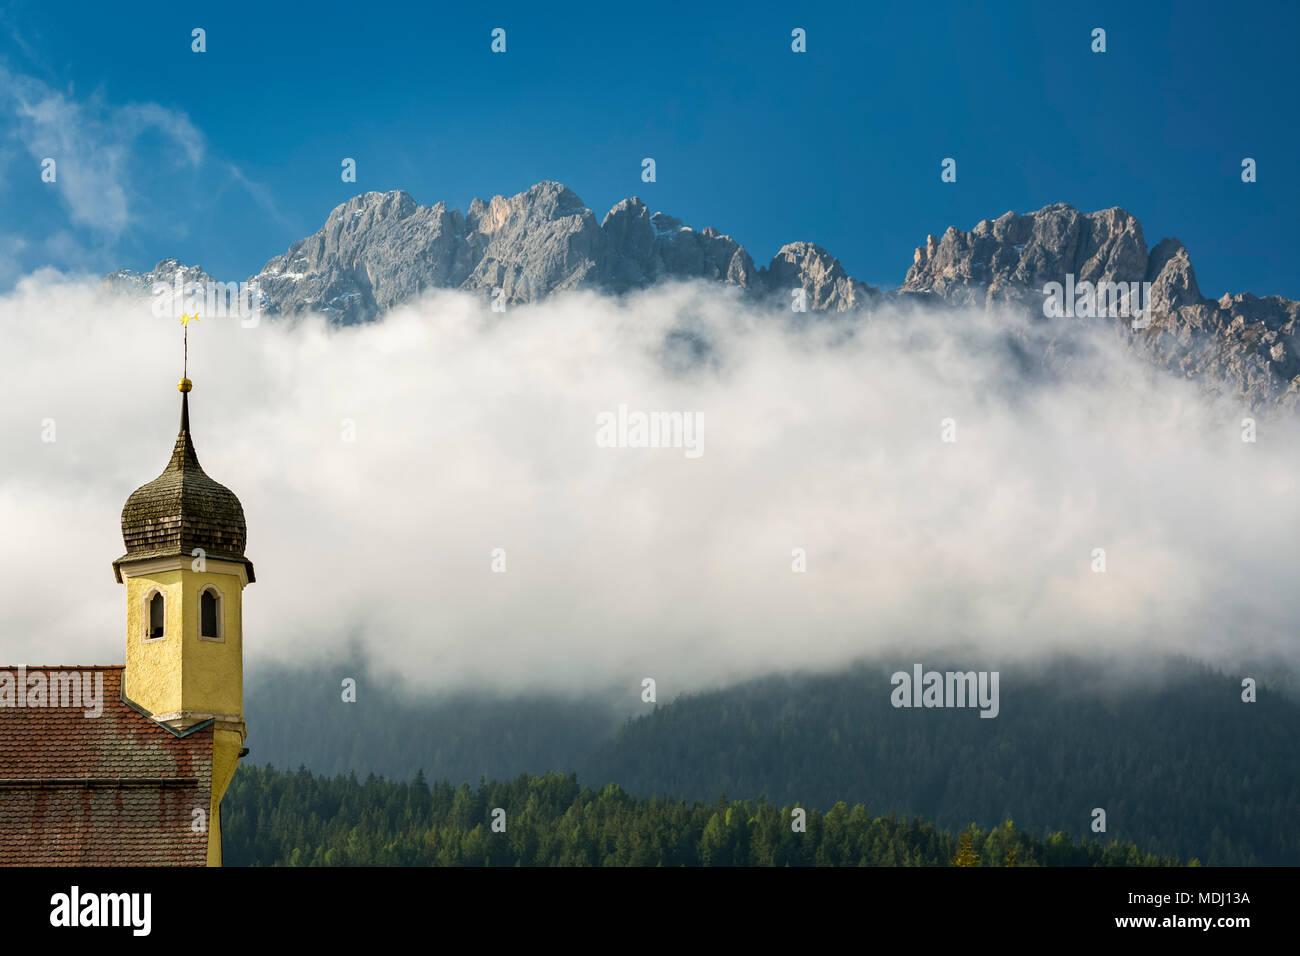 Church spire in the valley with mountain peaks peering out from the clouds covering the mountainside; San Candido, Bolzano, Italy Stock Photo